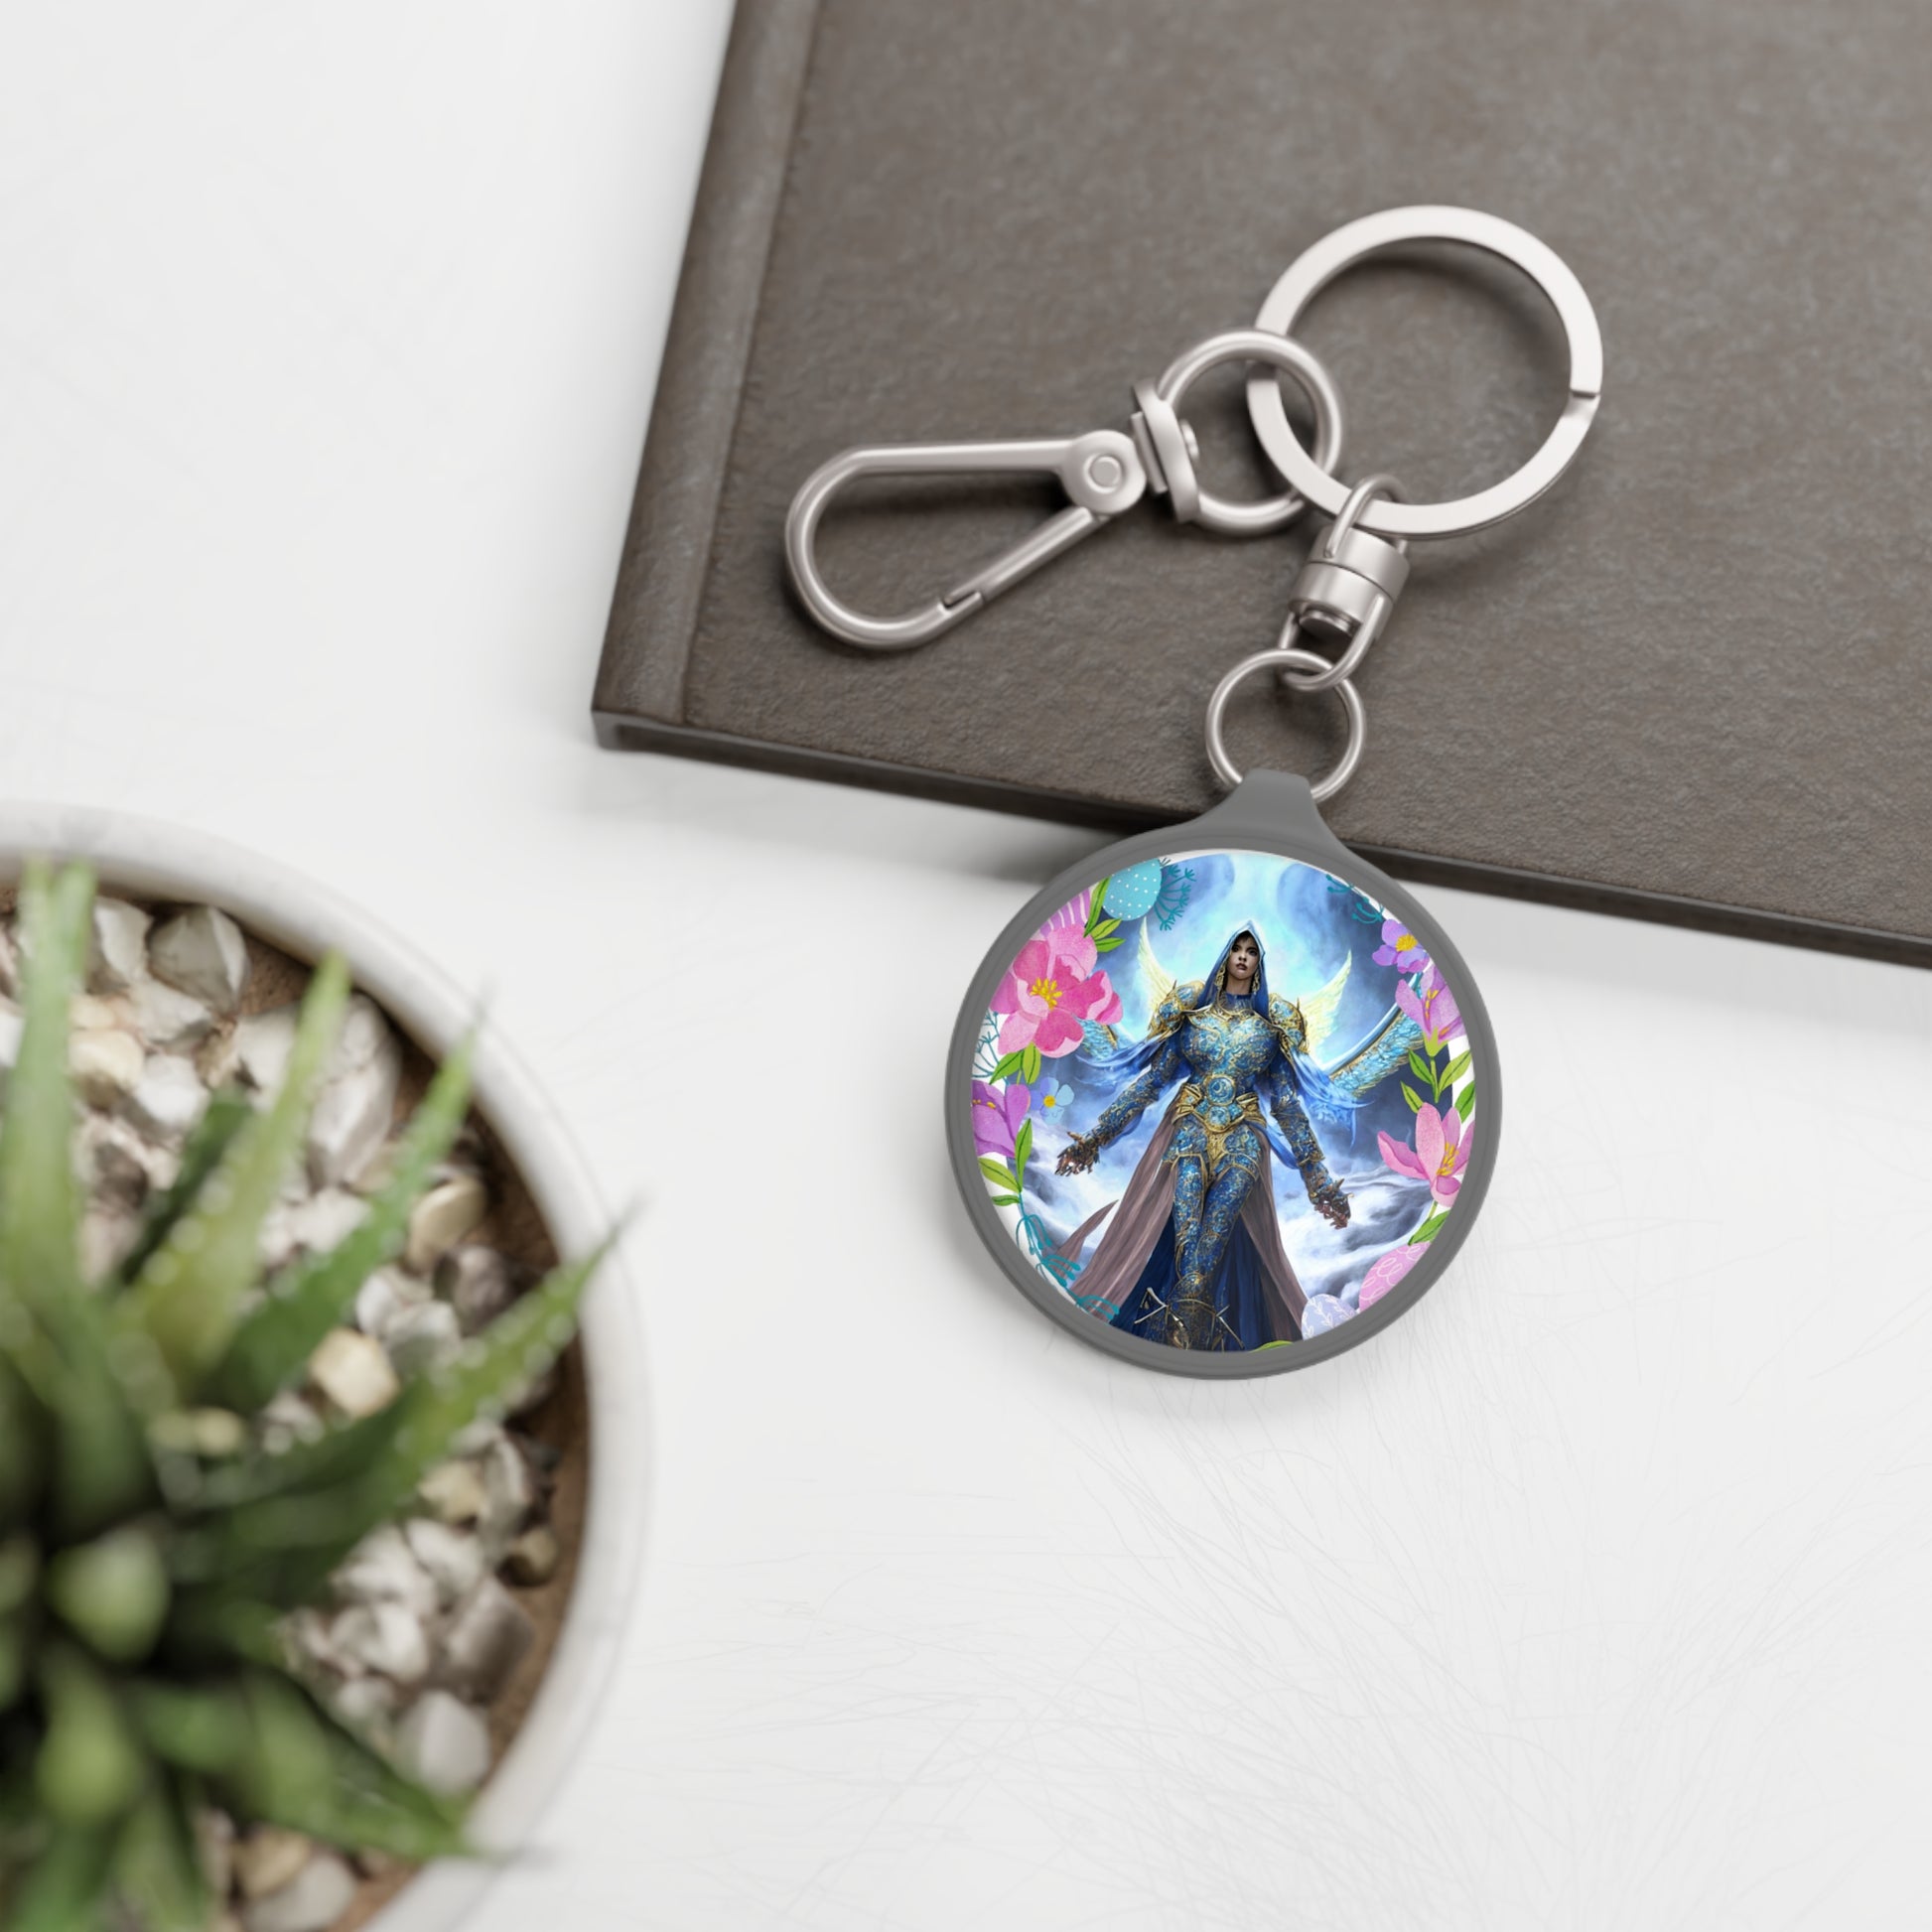 Awaken Inner Serenity: Mebahiah Guardian Angel Keyring for Peaceful Reflection - Angelic Thrones: Your Gateway to the Angelic Realms